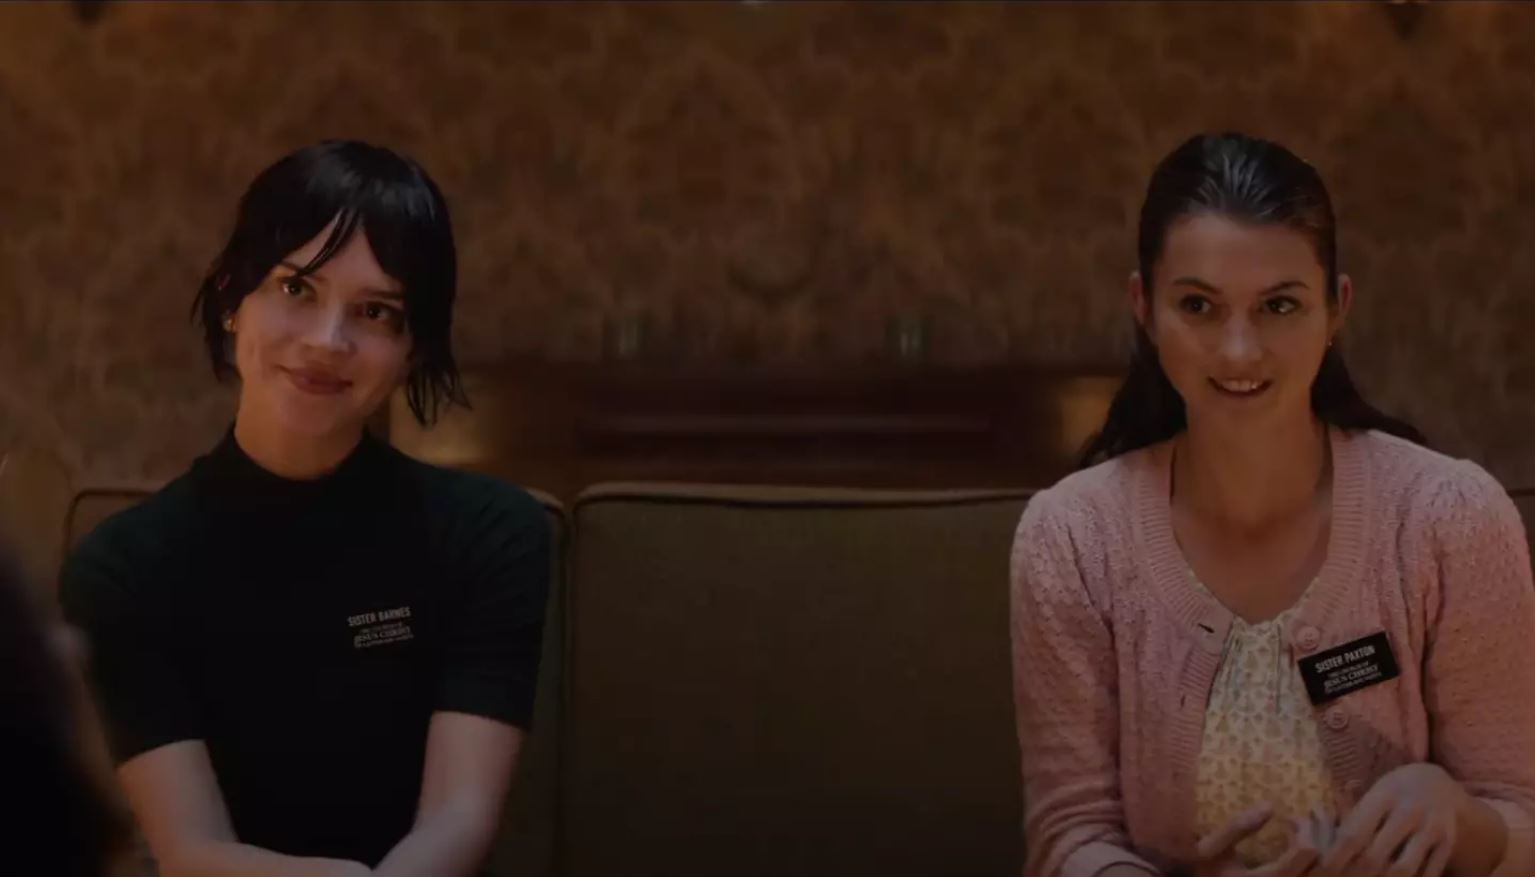 It follows two Mormon girls trapped in a house with Hugh's character